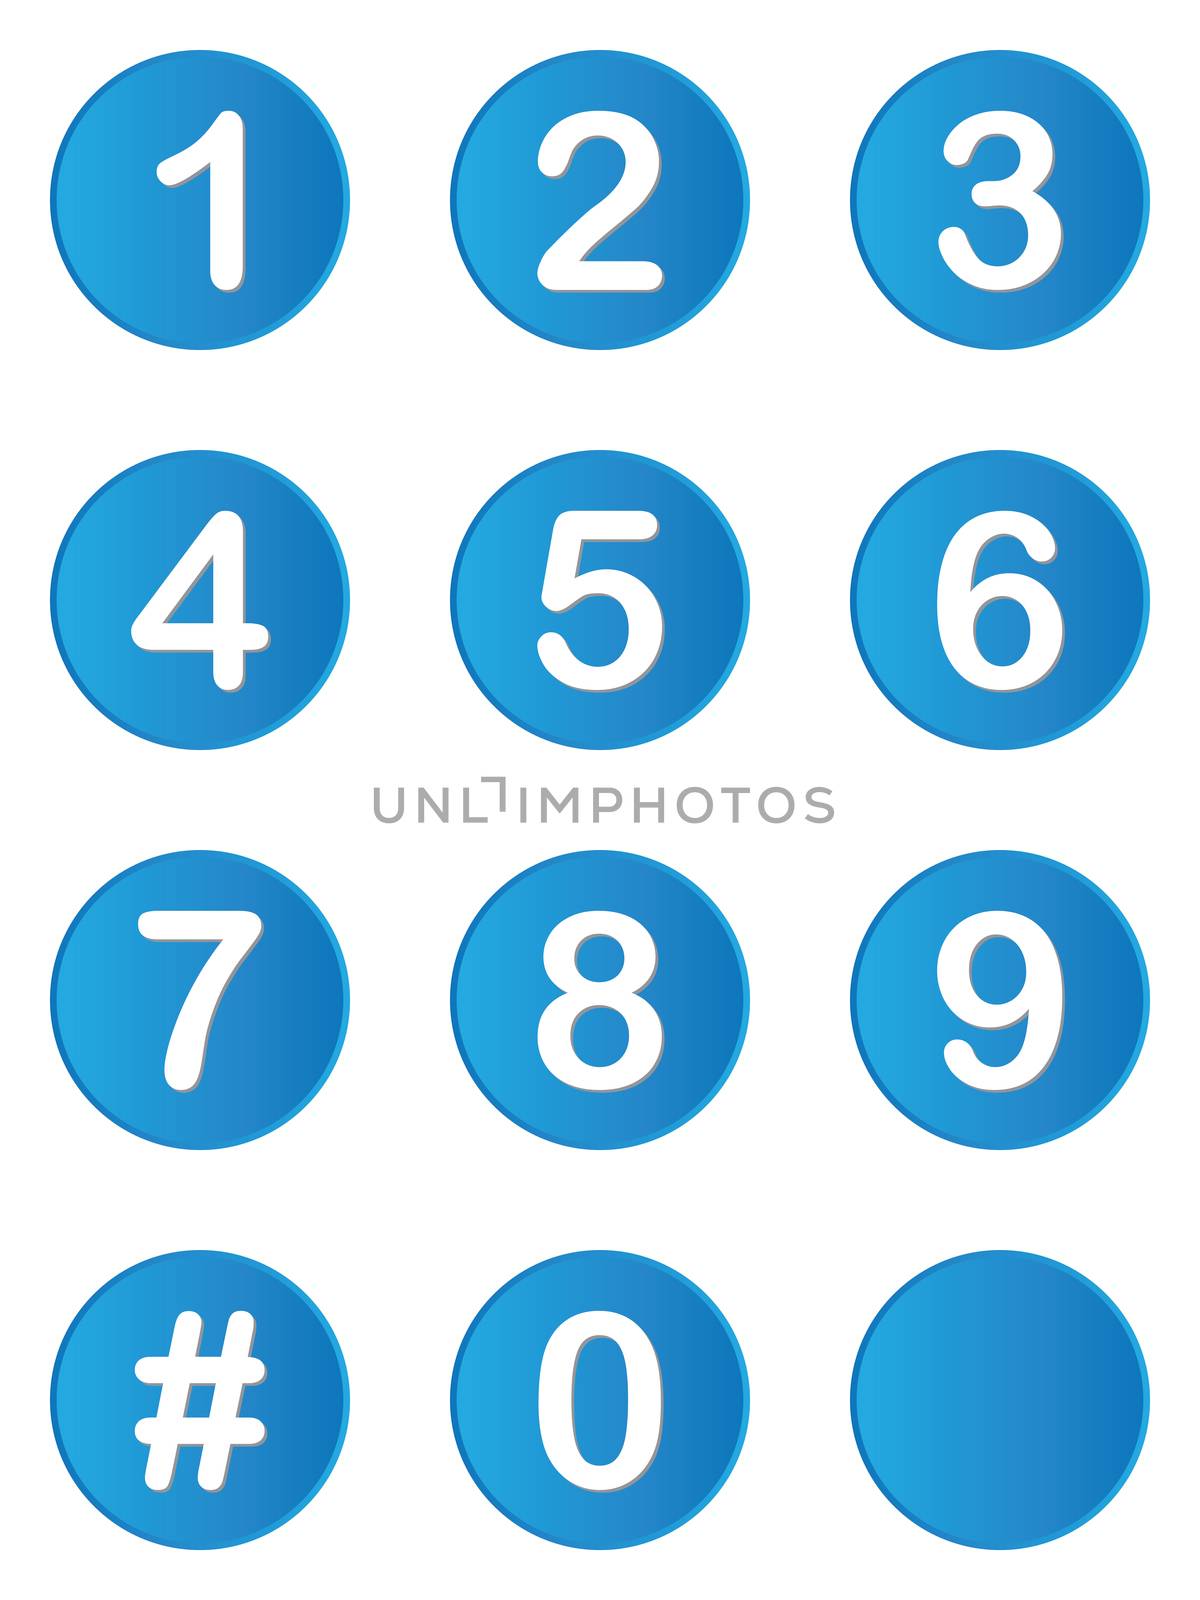 Illustrated set of buttons with numbers on by DragonEyeMedia